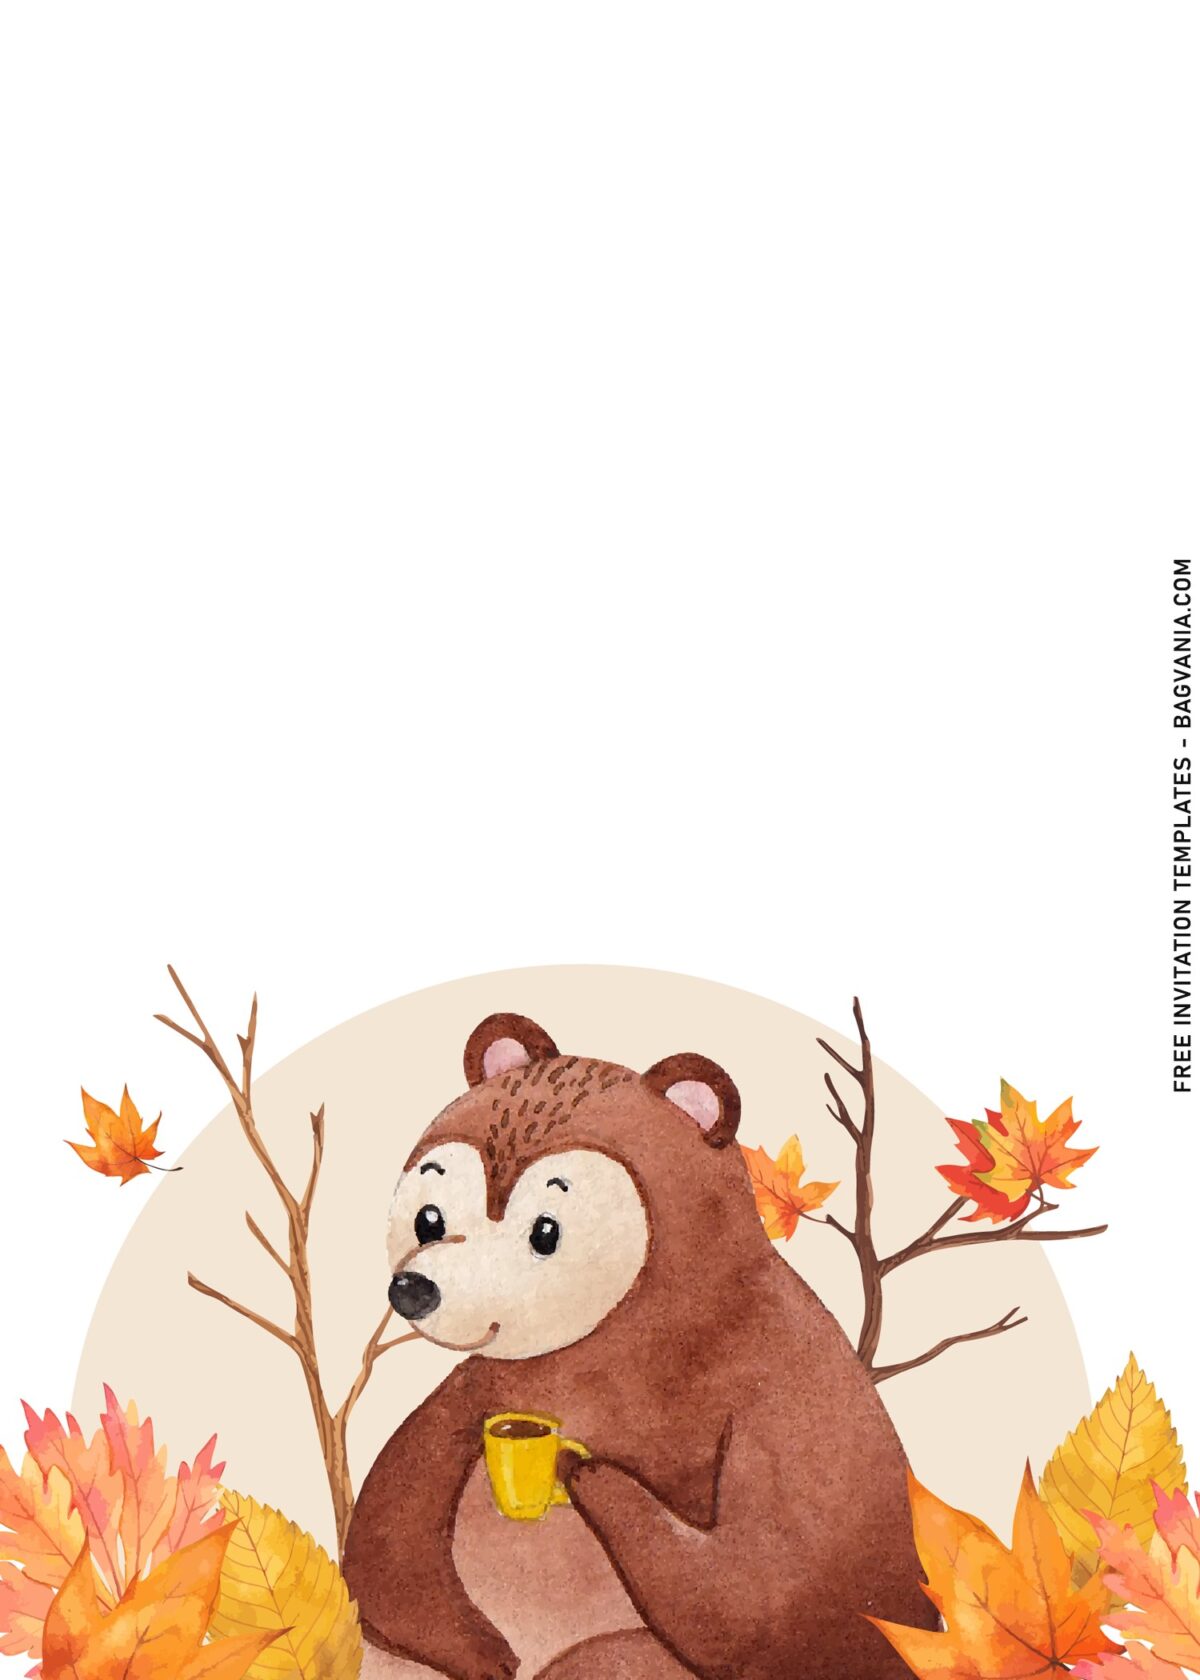 7+ Watercolor Forest Birthday Invitation Templates With Woodland Animal with bear